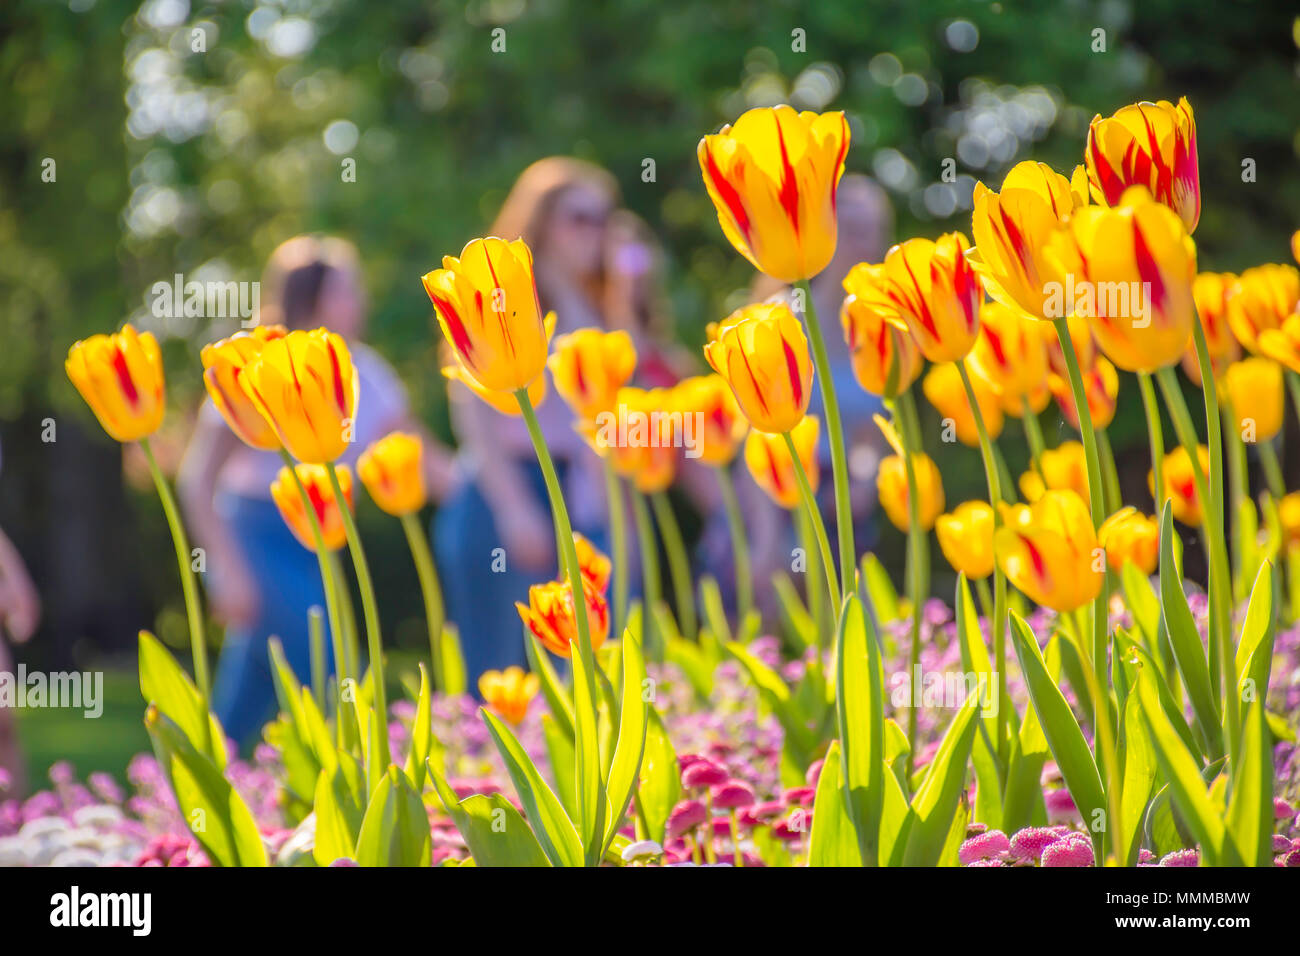 Red and yellow tulips on flower bed in Brecon park,Lichfield,  Uk.Beautiful british flowers in spring.Vibrant, saturated colors, blurred people. Stock Photo